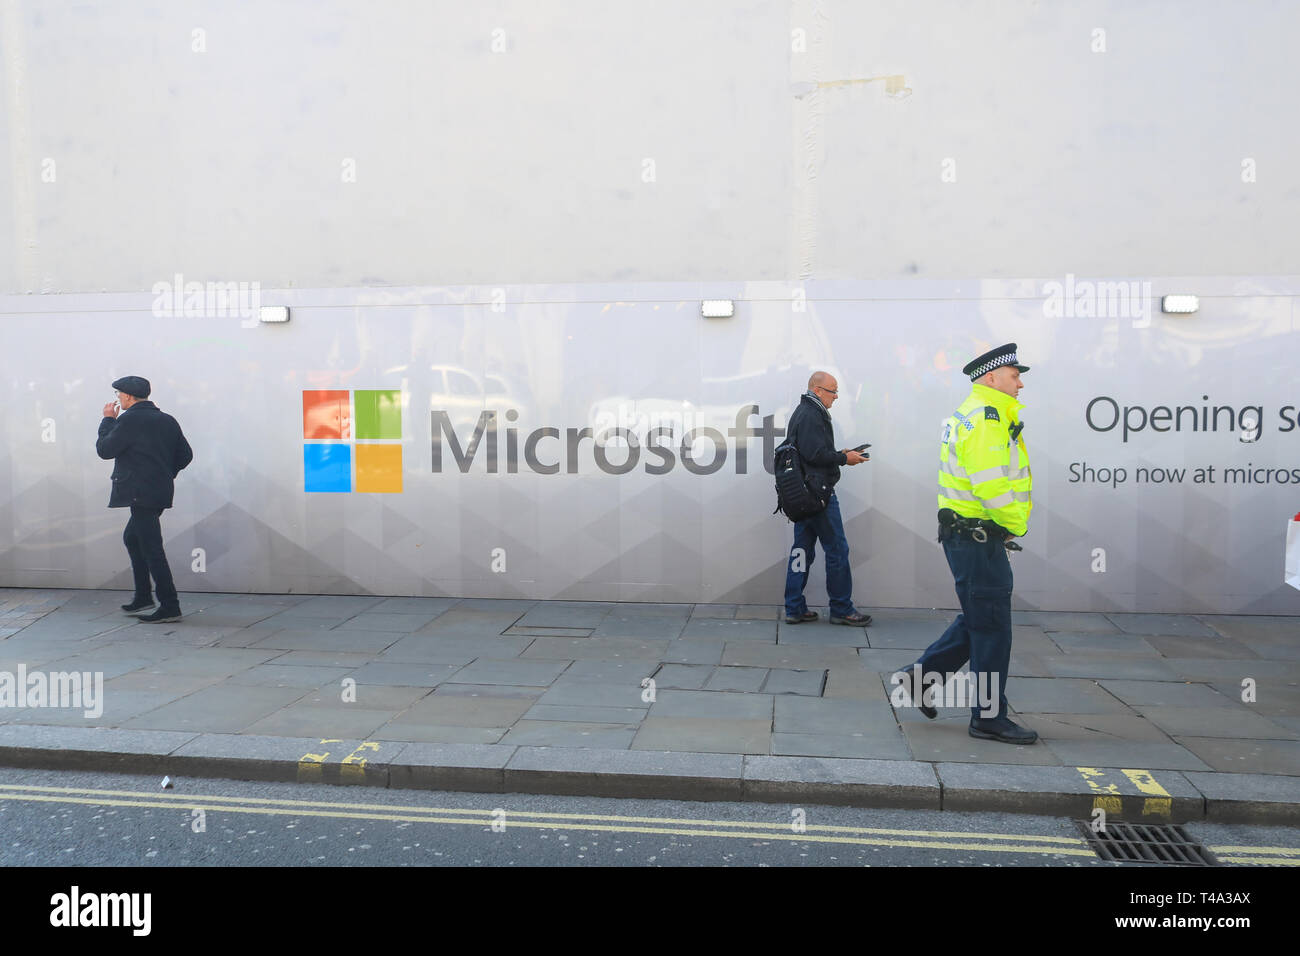 London, UK. 15th Apr, 2019. Pedestrians walk past a wall with the logo Microsoft Software giant as a new store prepares to open Oxford Street Credit: amer ghazzal/Alamy Live News Stock Photo